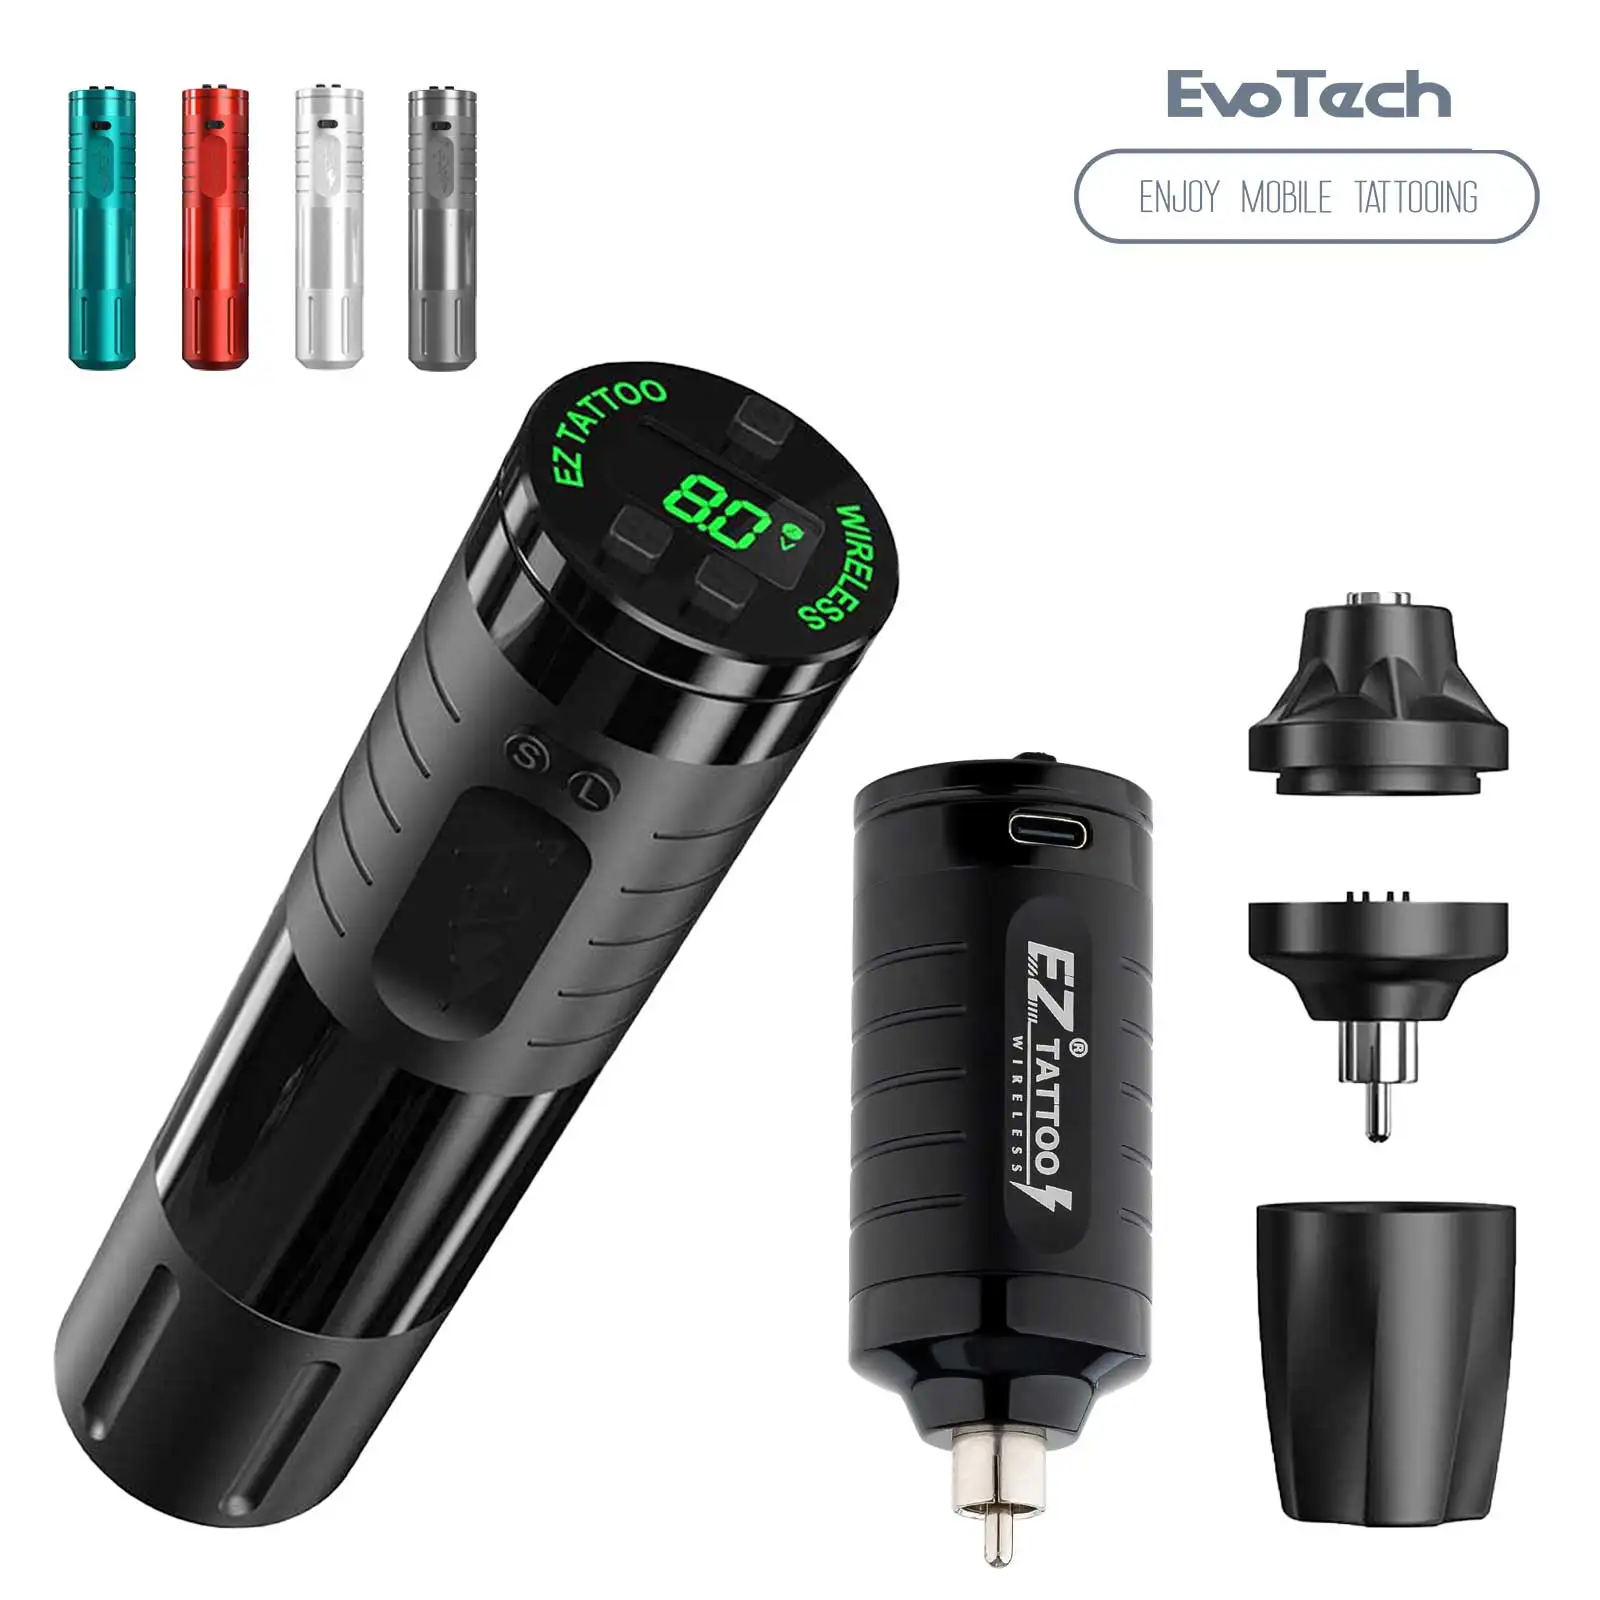 EZ EvoTech Wireless Battery Tattoo Pen Machine with Power Supply Intelligent Customized Motor Smarter Powerful & Fast Coloring